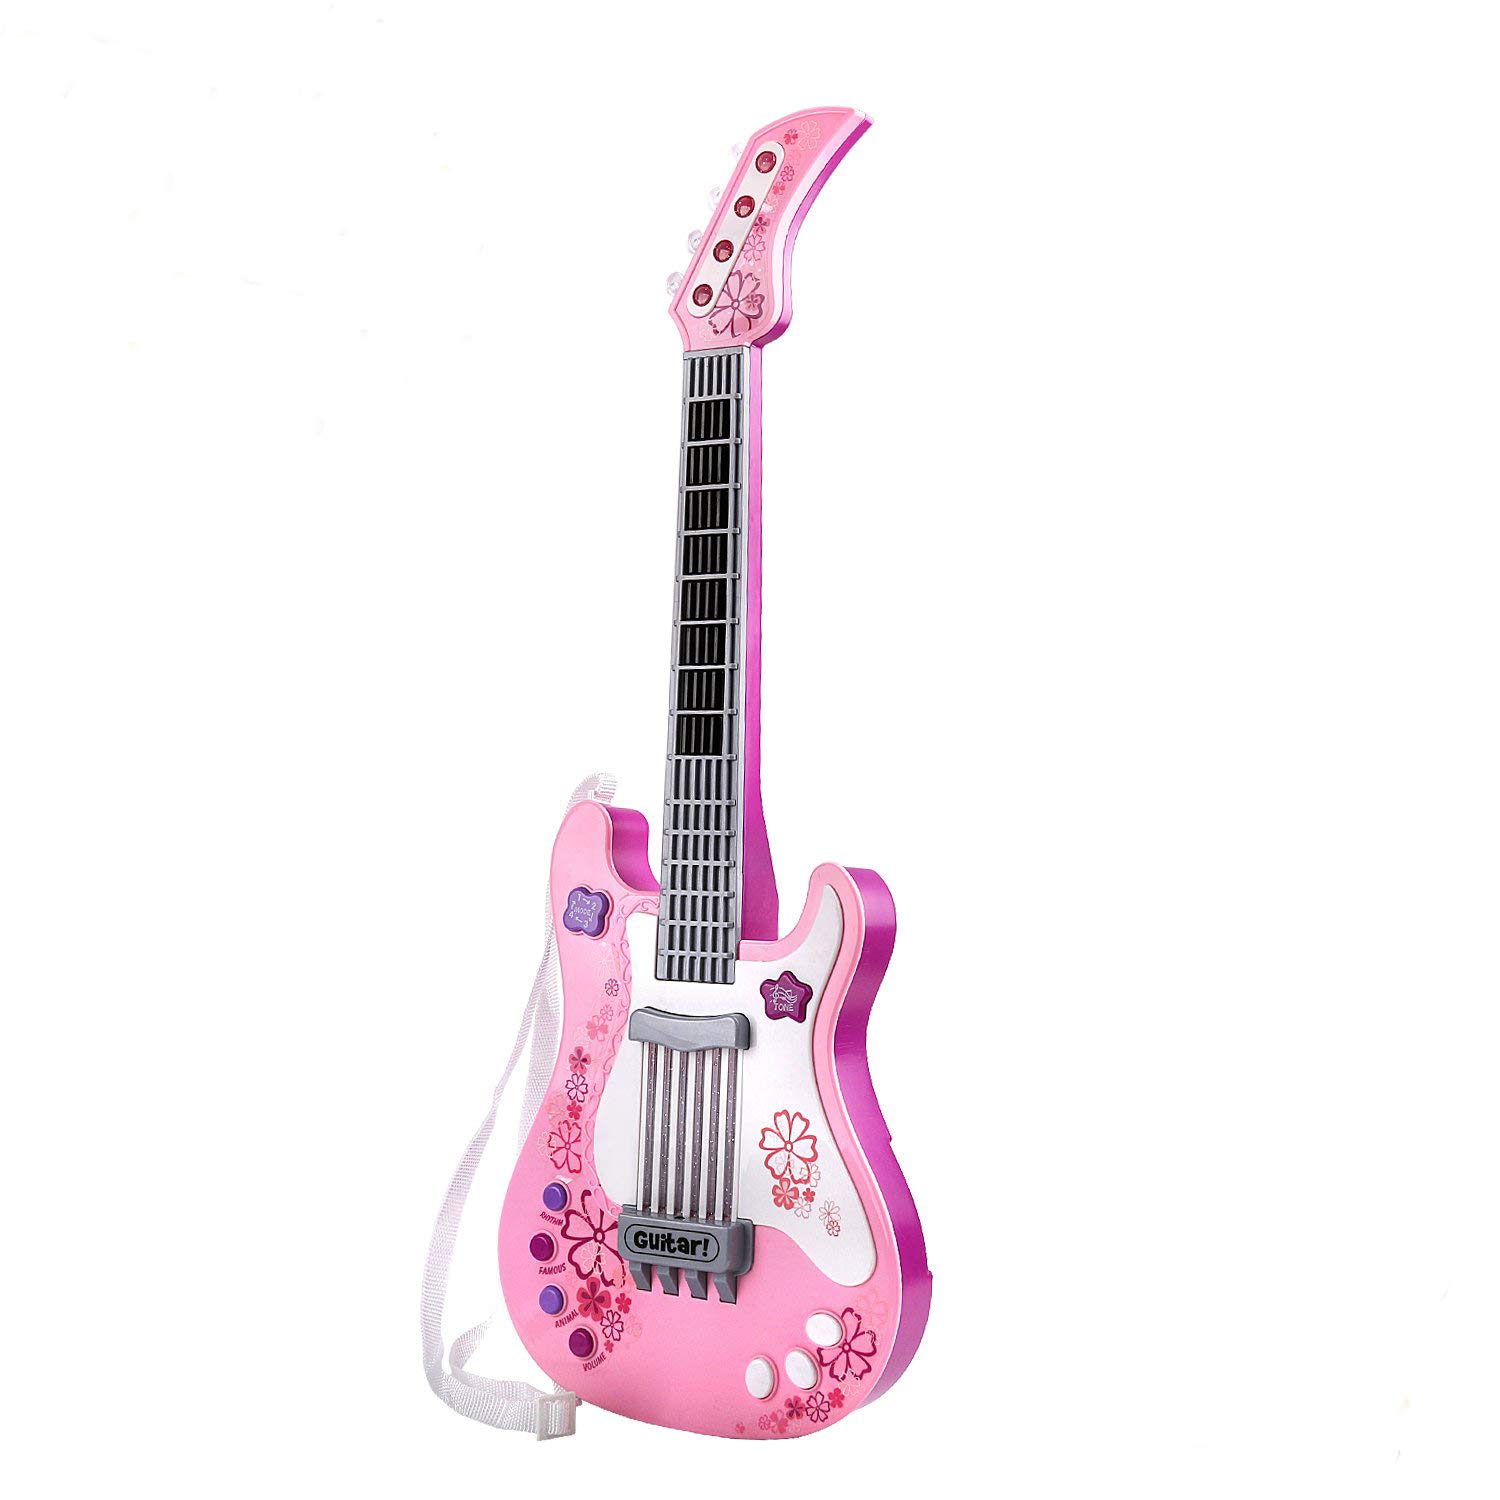 M SANMERSEN Guitar Toys for Kids with Vibrant Sounds No String-RO (Pink)